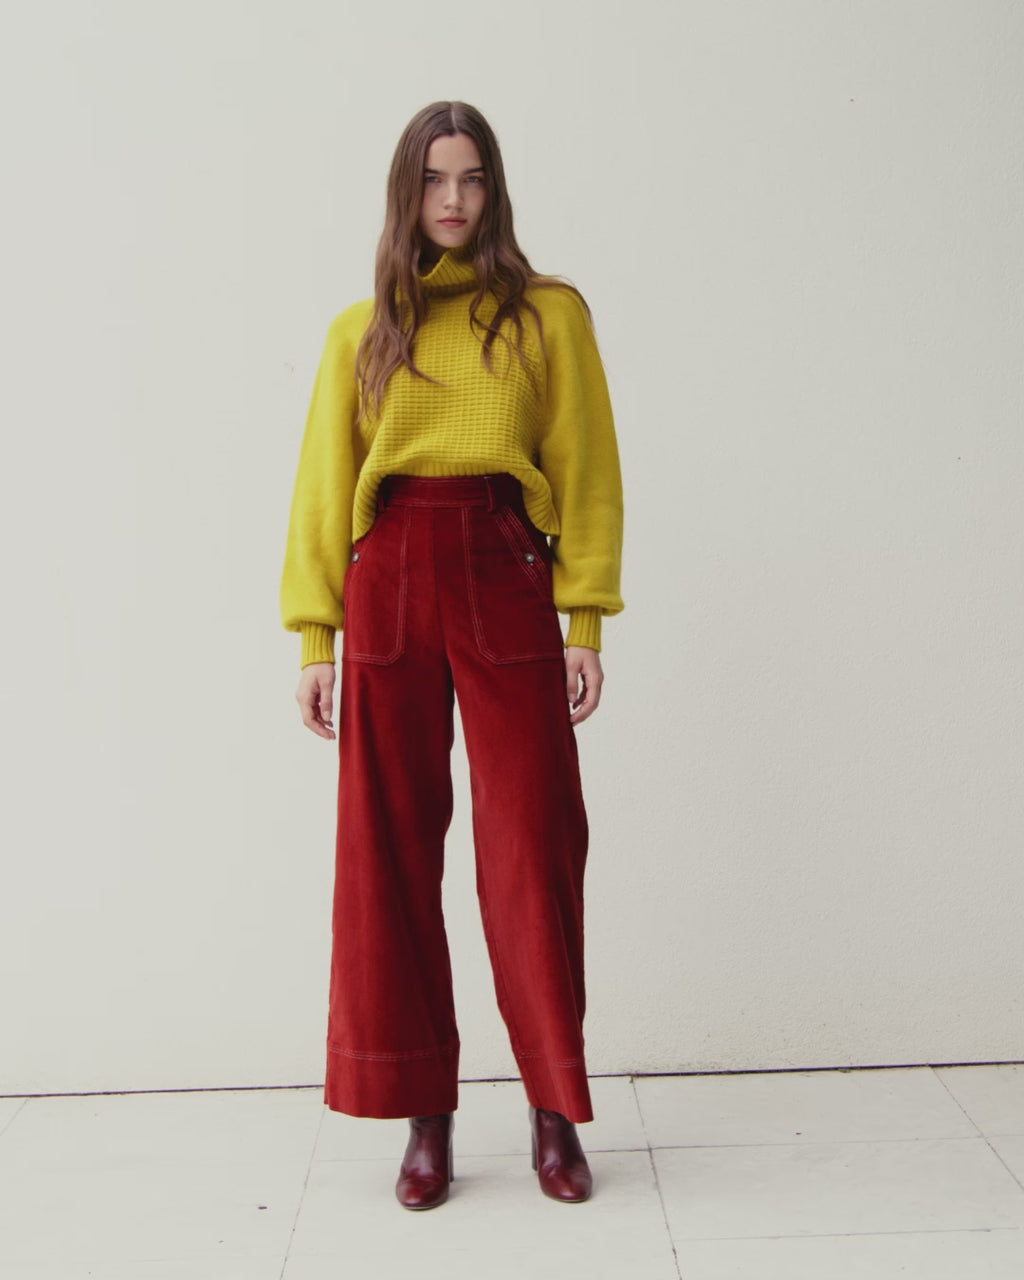 Wiggy Kit | Waffle Turtleneck in Yellow | Video of Model Wearing Yellow Jumper and Red Jeans